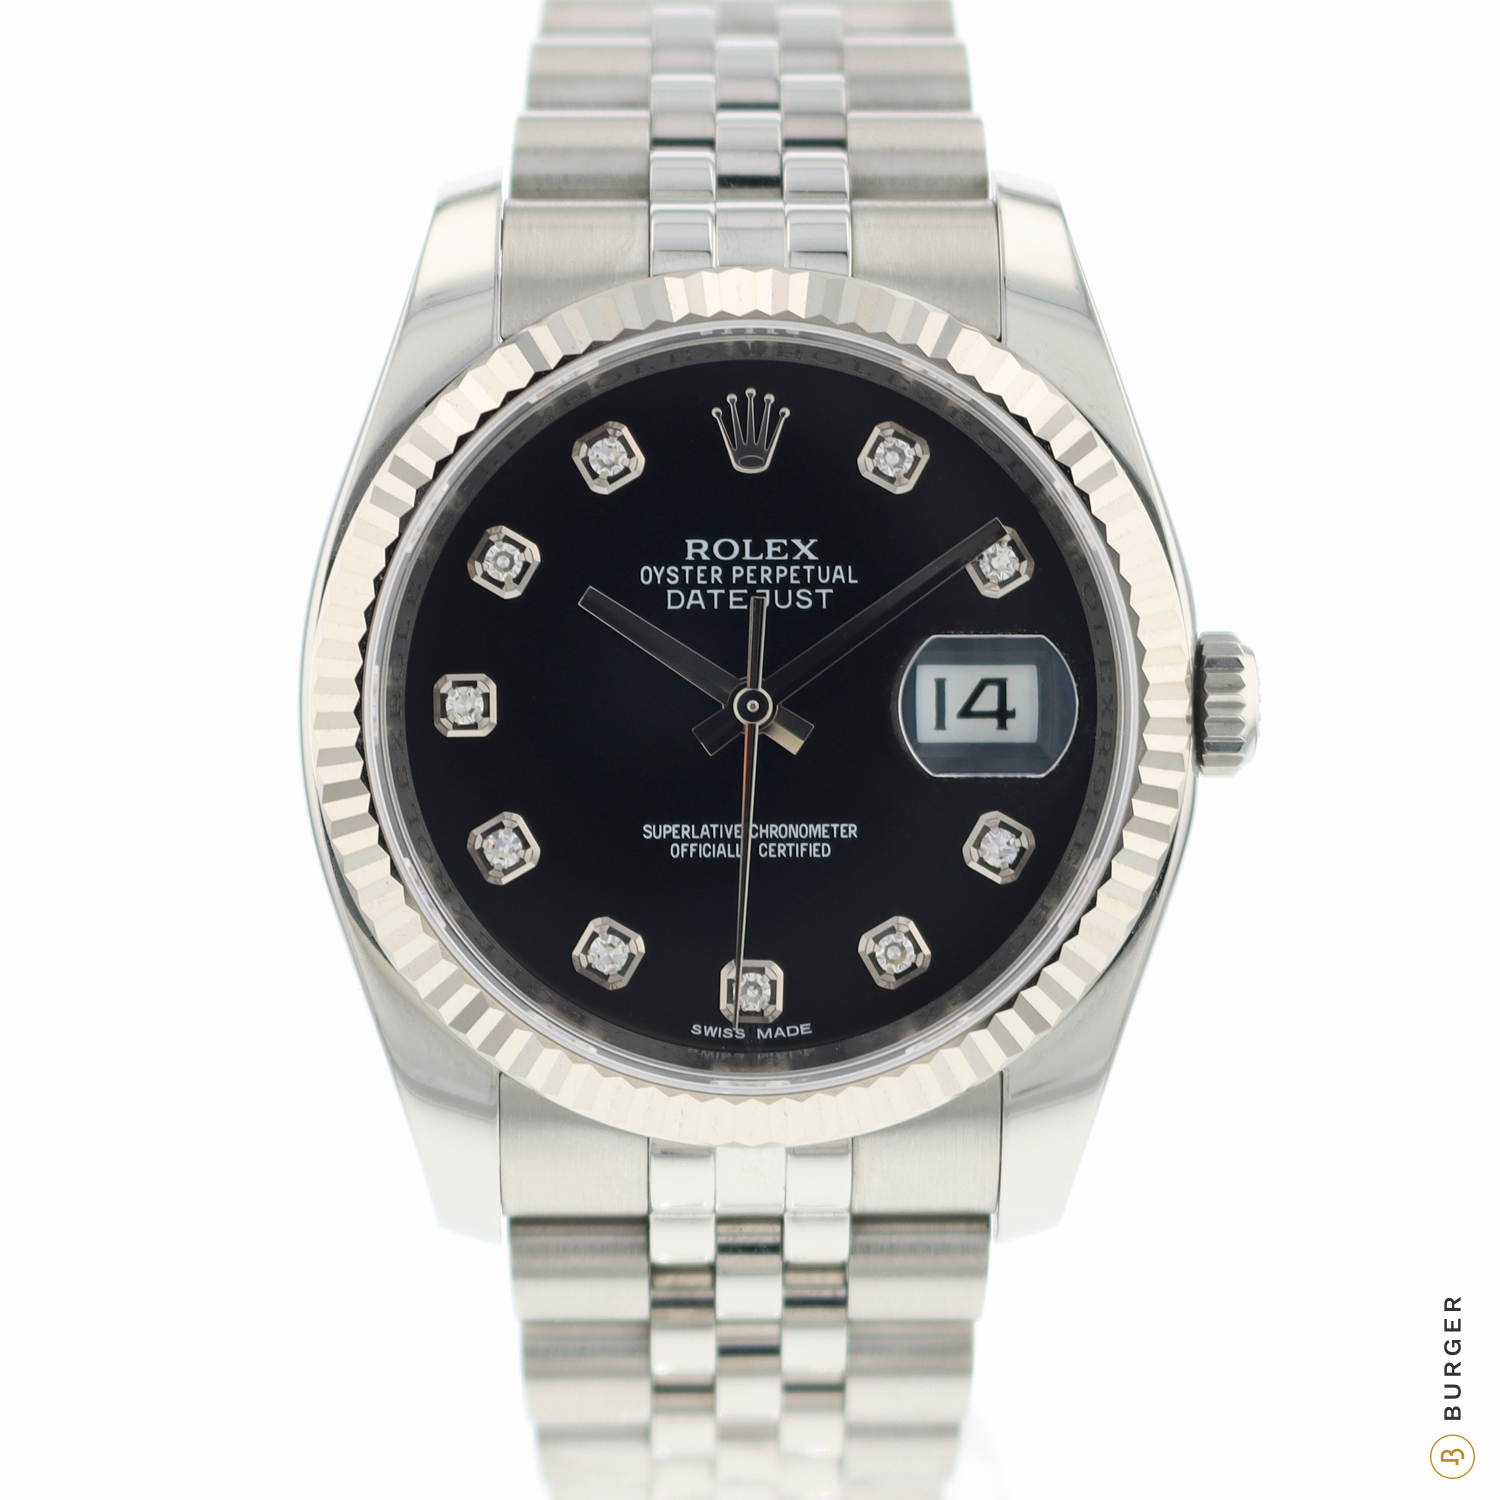 Datejust 36 Jubilee Fluted Black Diamond Dial - Rolex - Sold watches ...